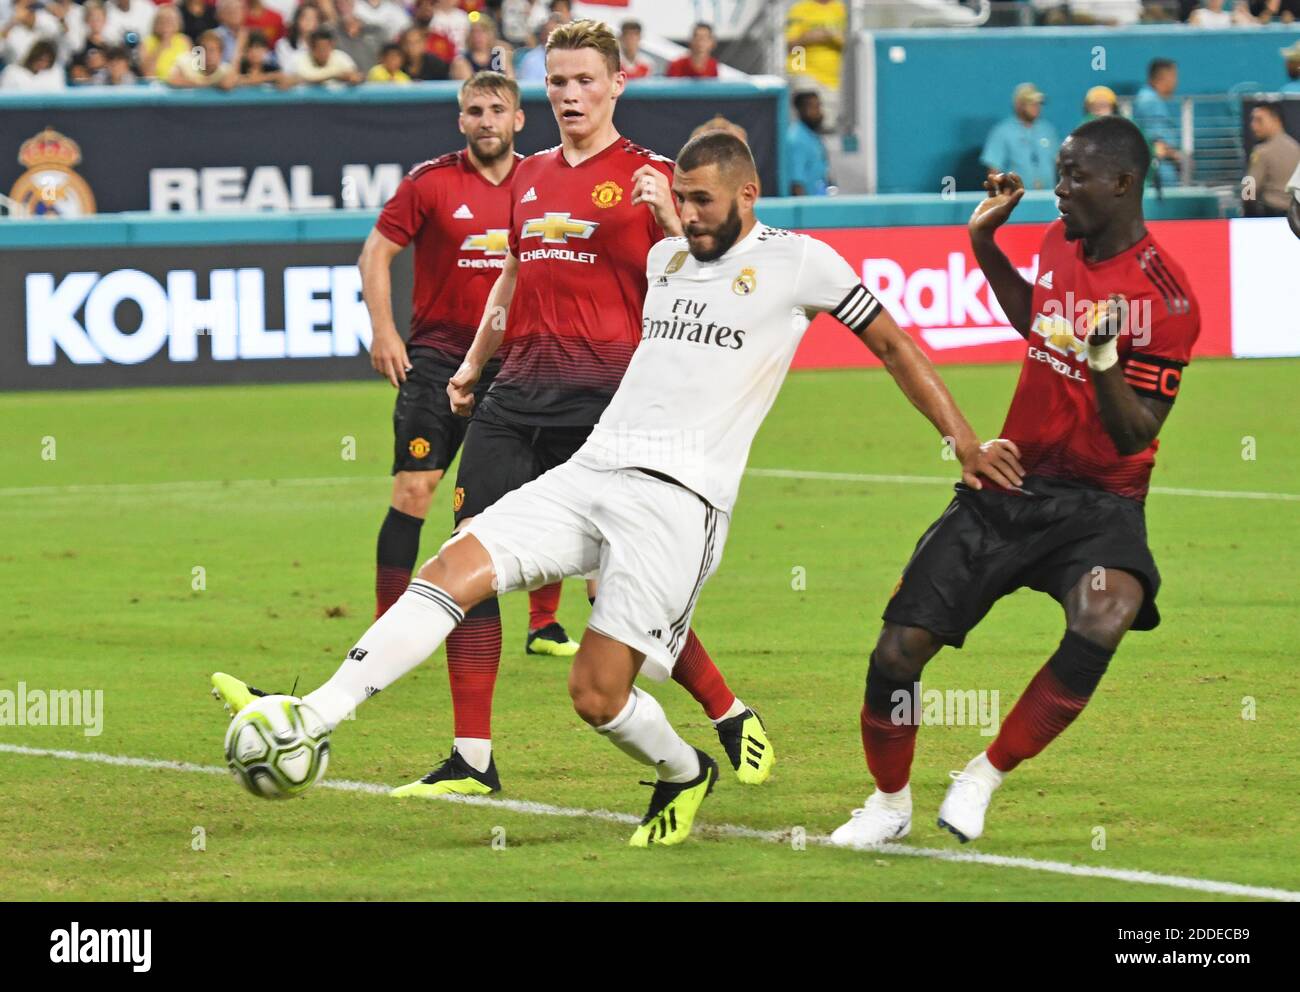 NO FILM, NO VIDEO, NO TV, NO DOCUMENTARY - Karim Mostafa Benzema scores a goal past David de Gea of Manchester United in the first half during International Champions Cup action at Hard Rock Stadium in Miami Gardens, FL, USA on Tuesday, July 31, 2018. Manchester United won, 2-1. Photo by Jim Rassol/Sun Sentinel/TNS/ABACAPRESS.COM Stock Photo